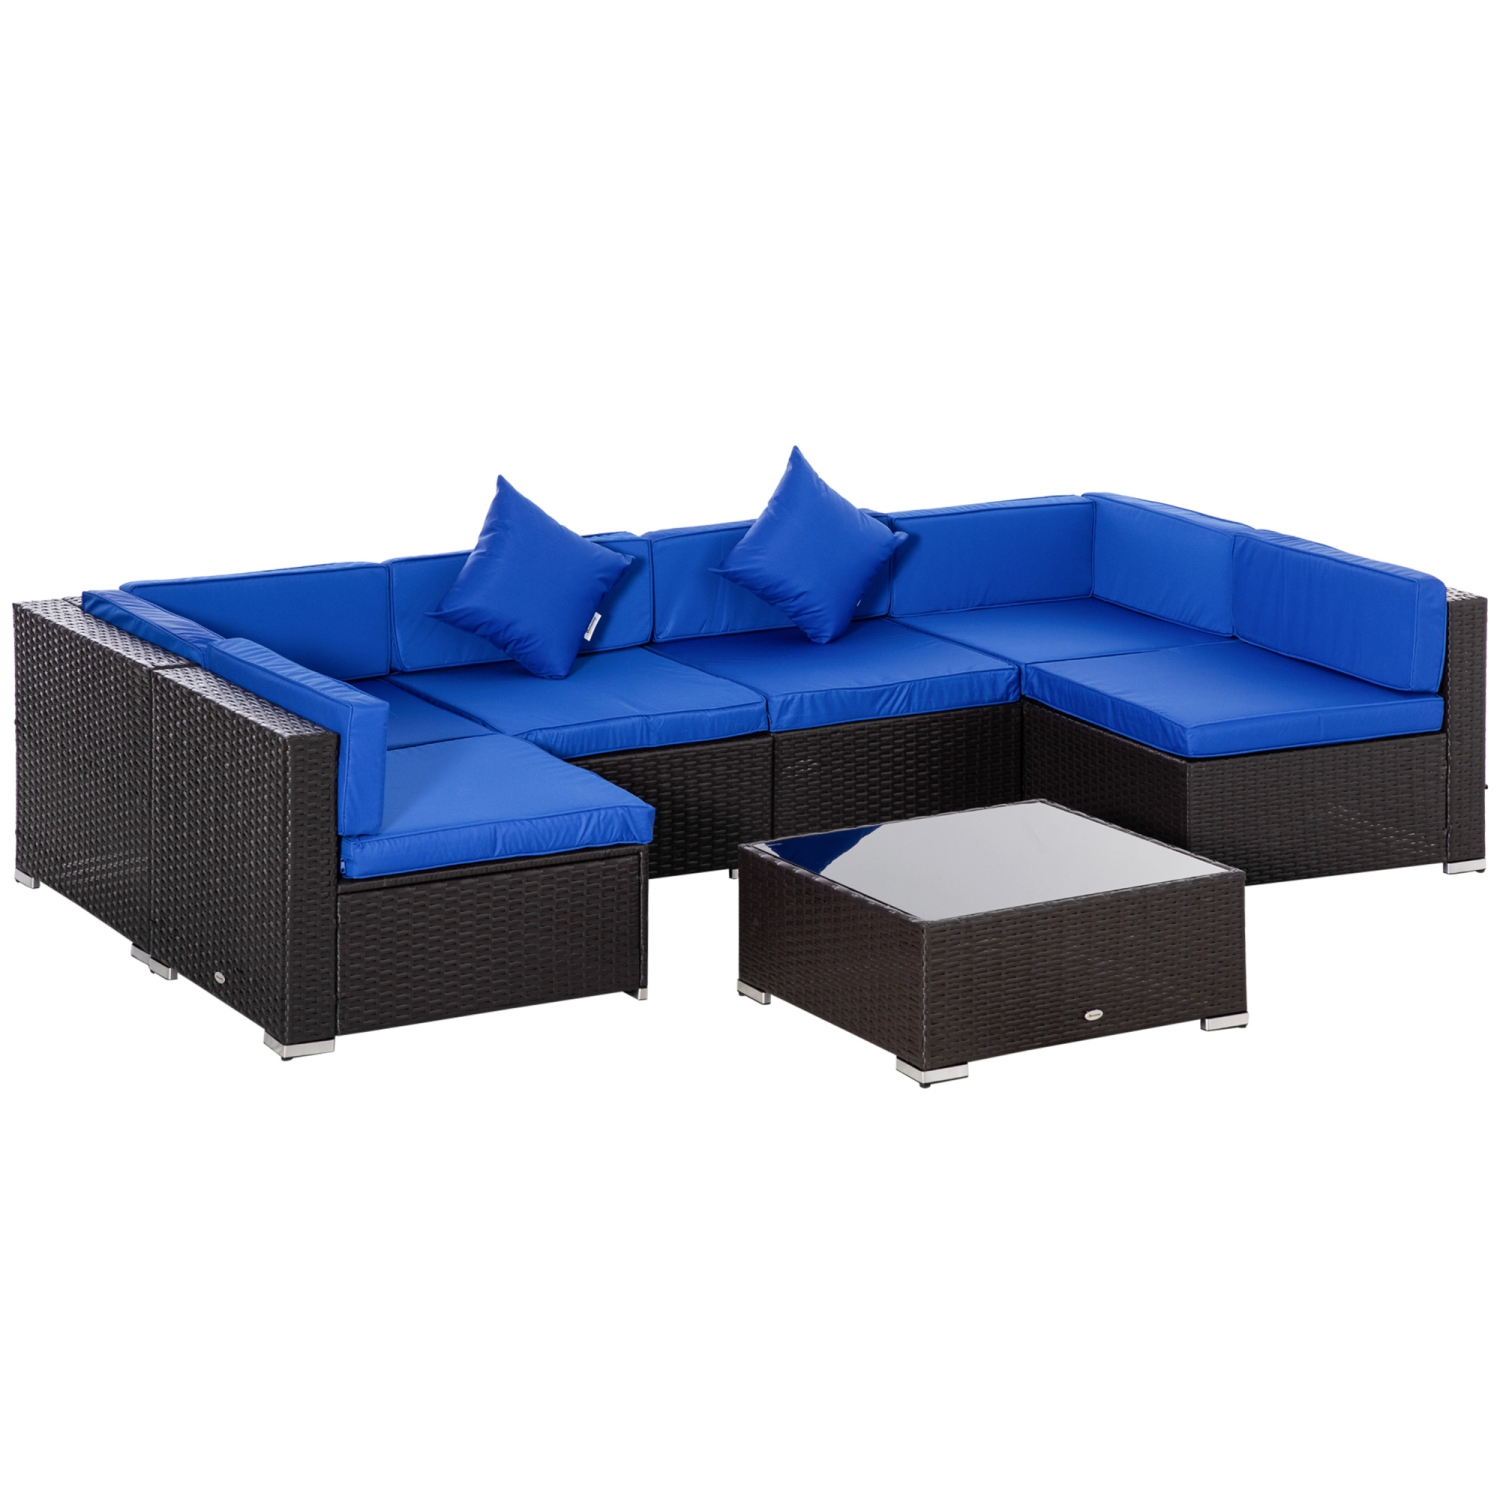 Outsunny 7 Pieces Outdoor Rattan Furniture Set, Patio Wicker Sectional Conversation Sofa Set w/ Cushions & Tempered Glass Coffee Table, Ideal for Garden, Lawn, and Deck, Blue